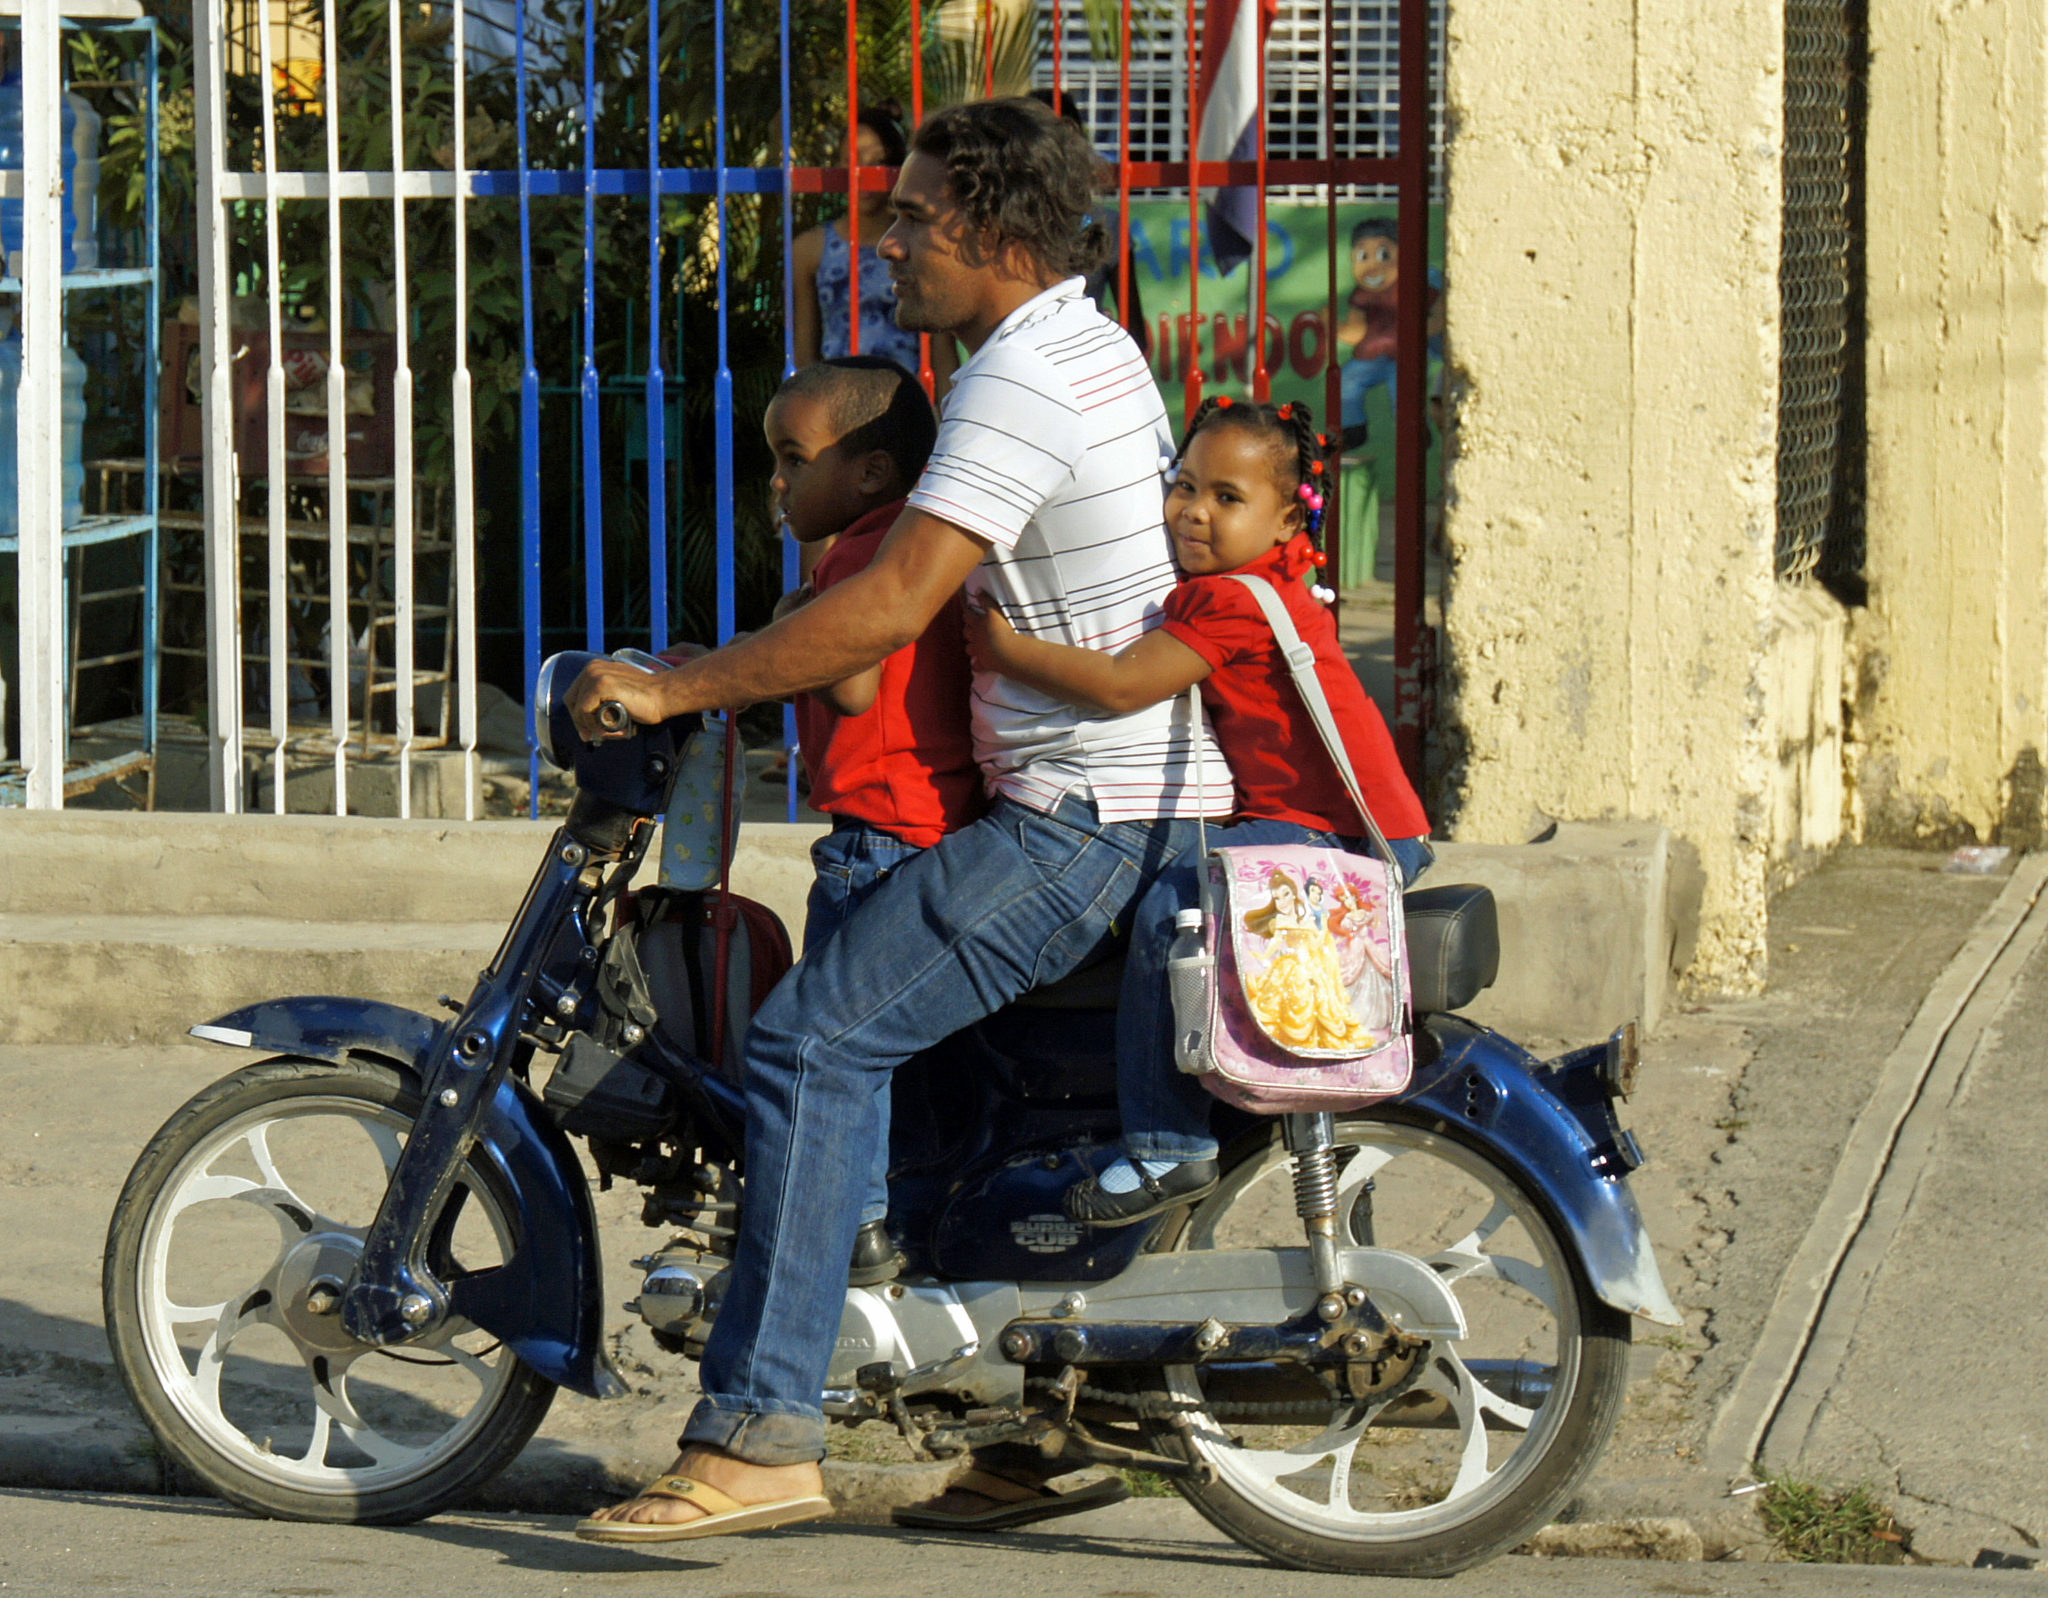 A family on a motorcycle in the Dominican Republic